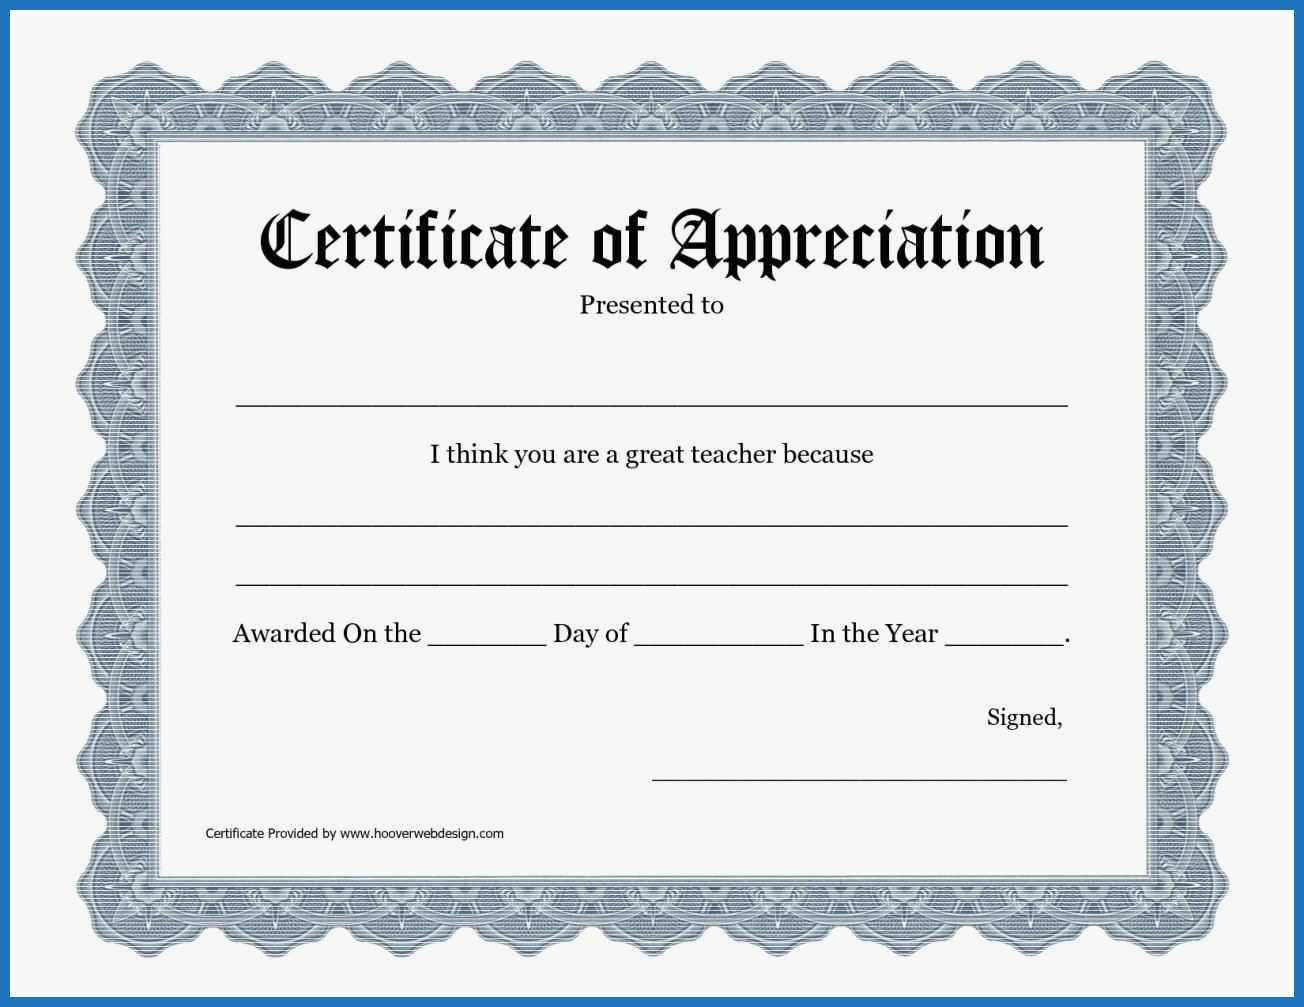 Certificate Templates: Free Template Certificate Of Appreciation With Regard To Free Template For Certificate Of Recognition